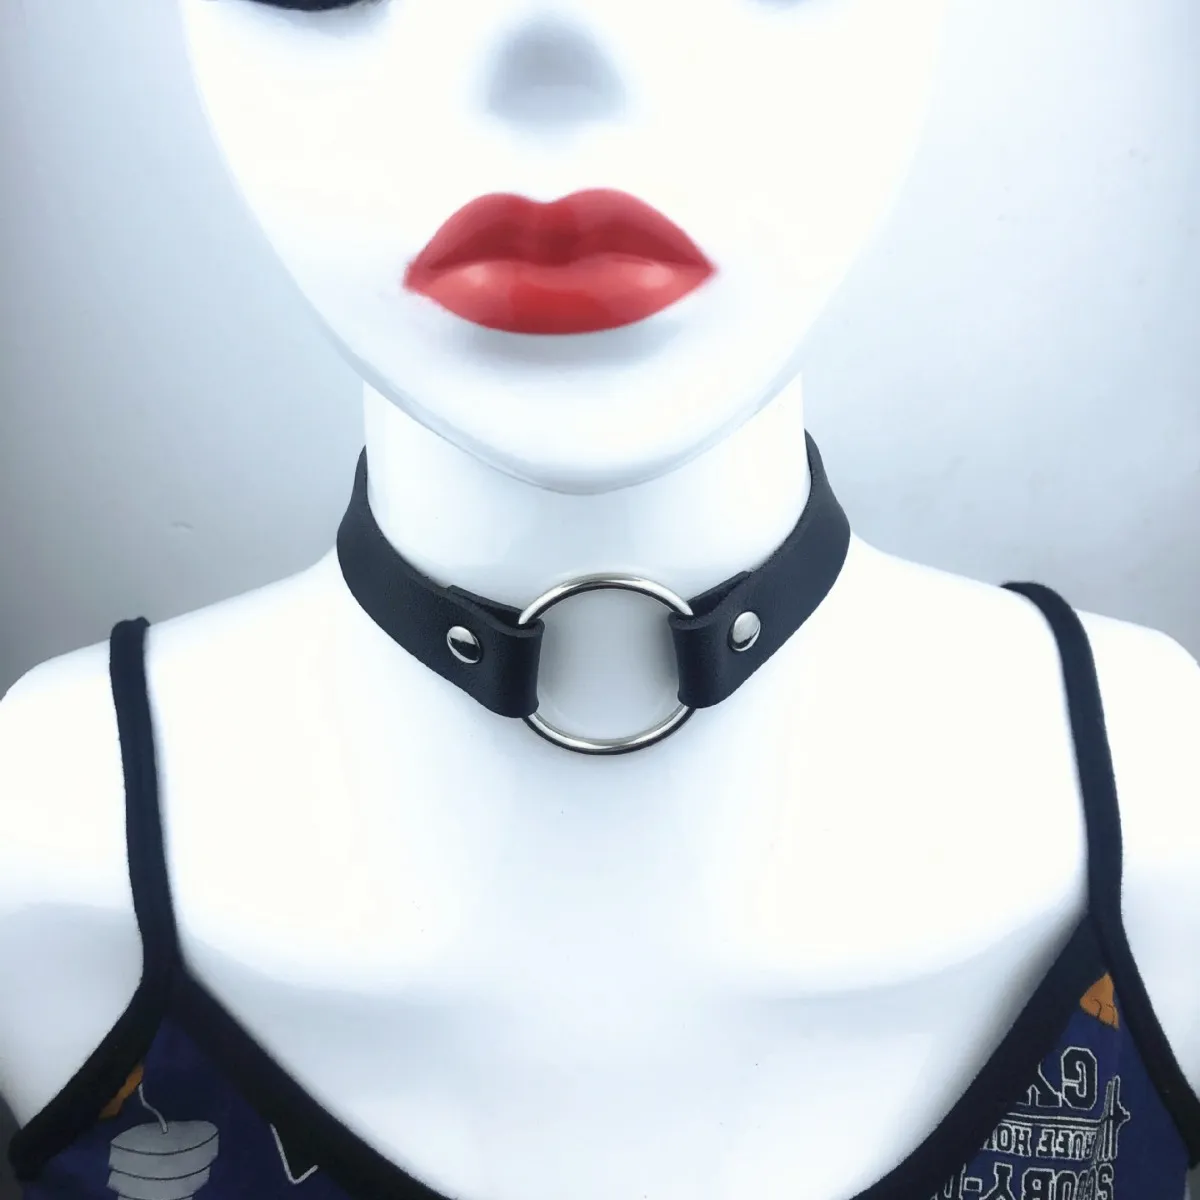 Chokers Gothic Black Spiked Punk Choker Collar Spikes Rivets Studded Chocker Necklace For Women Men Bondage Cosplay Goth Je Dhgarden Dhrwv